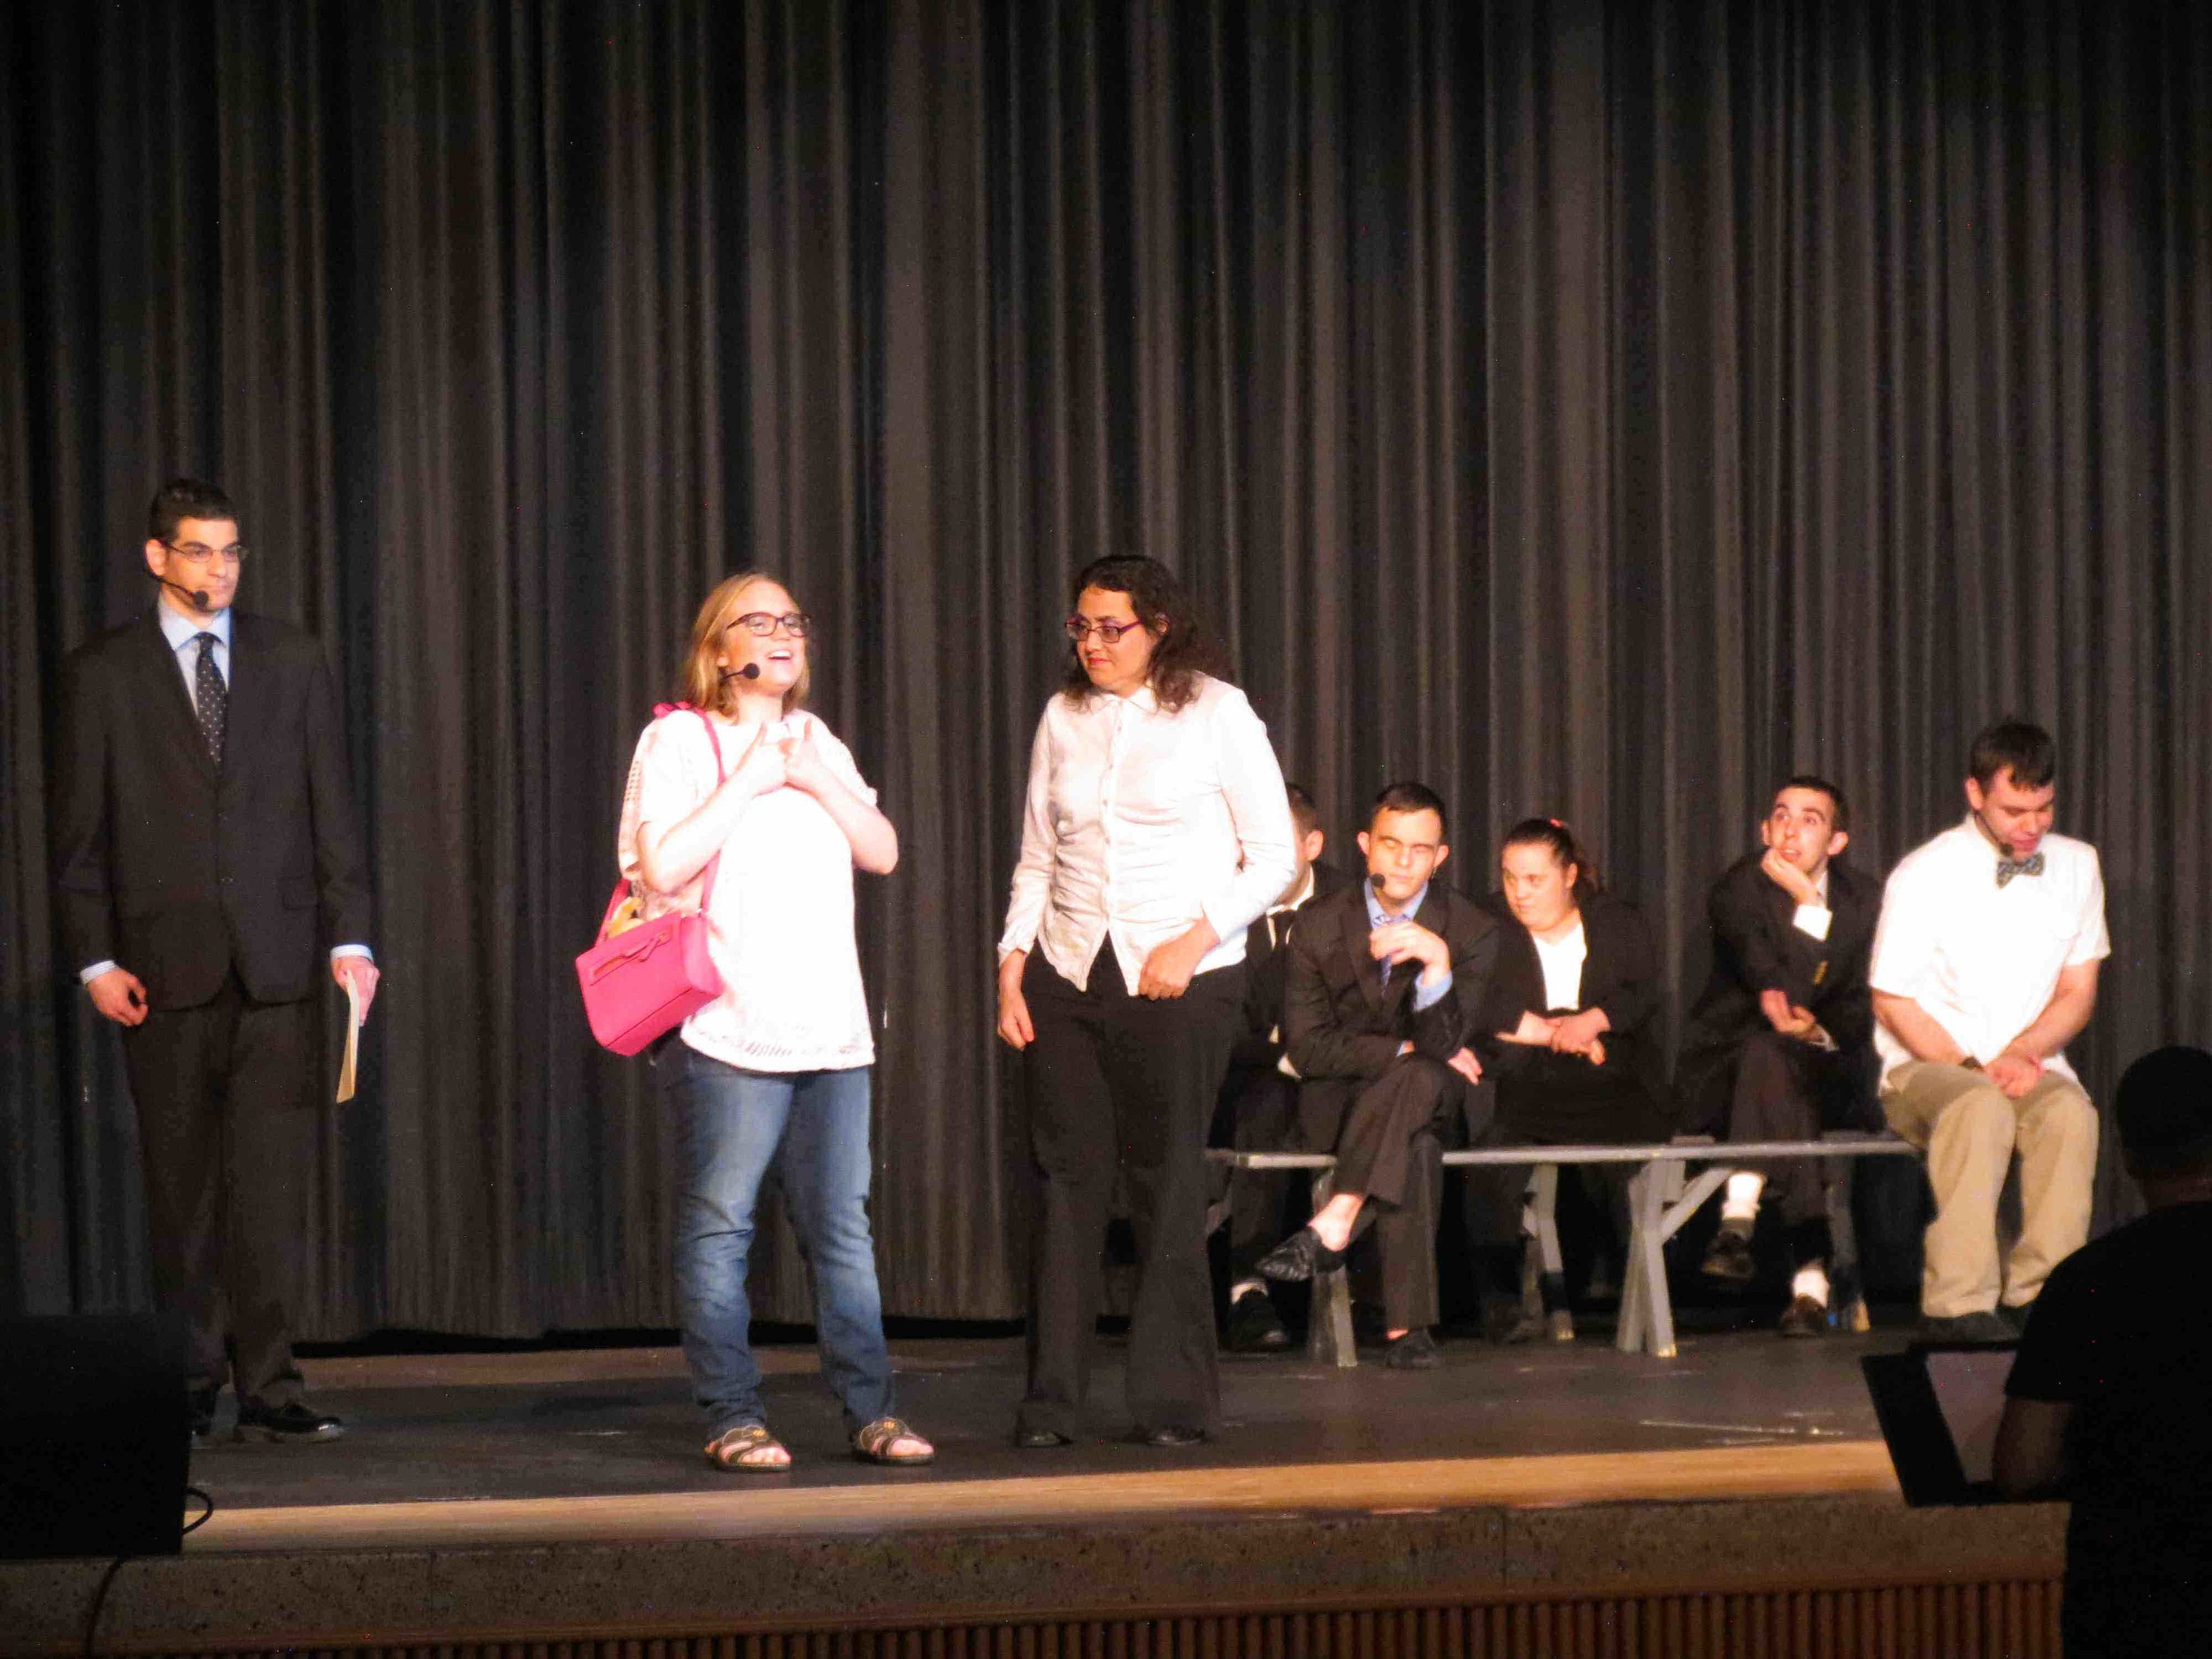 East Meadow School District officials said they were honored to welcome members of the FREE Players, a special needs acting troupe, to Clarke on June 3 and 4.